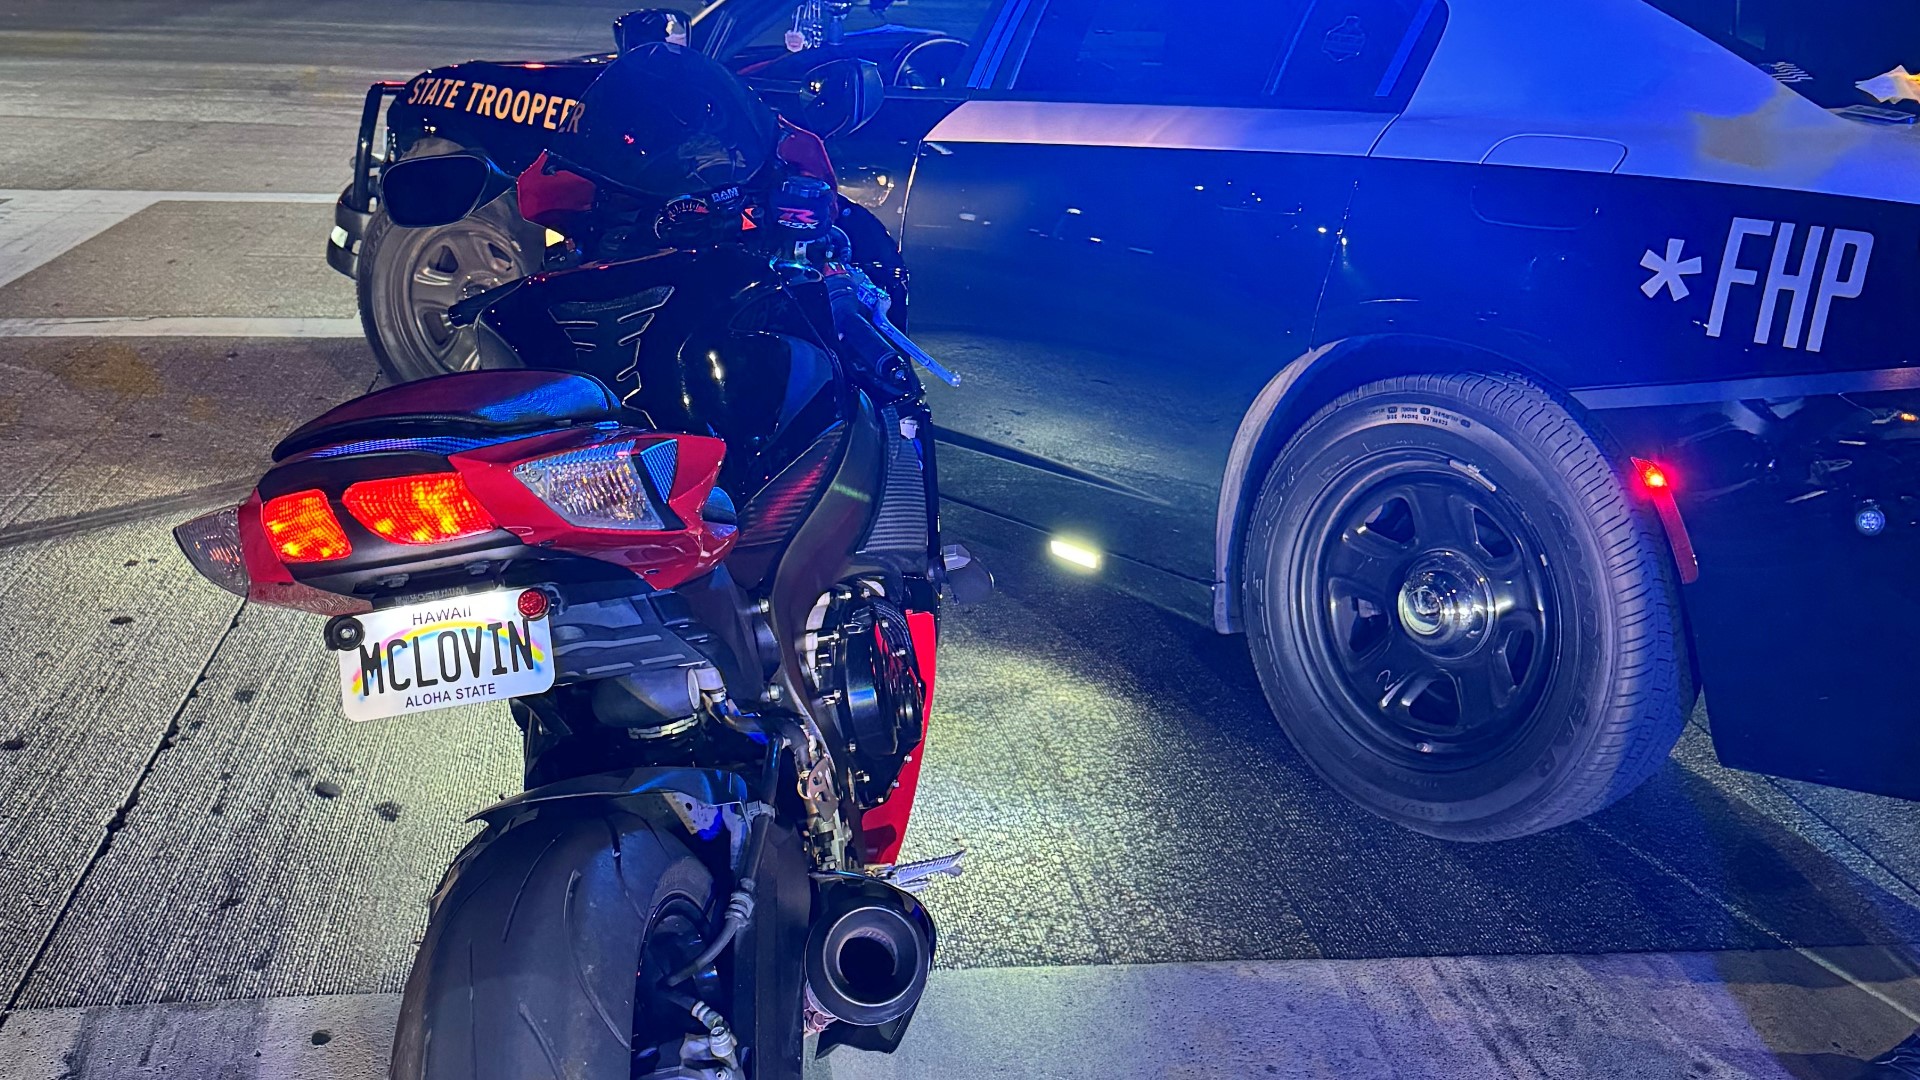 A man was arrested after he was caught speeding on a motorcycle with a fake "McLovin" plate and didn't stop, FHP said.